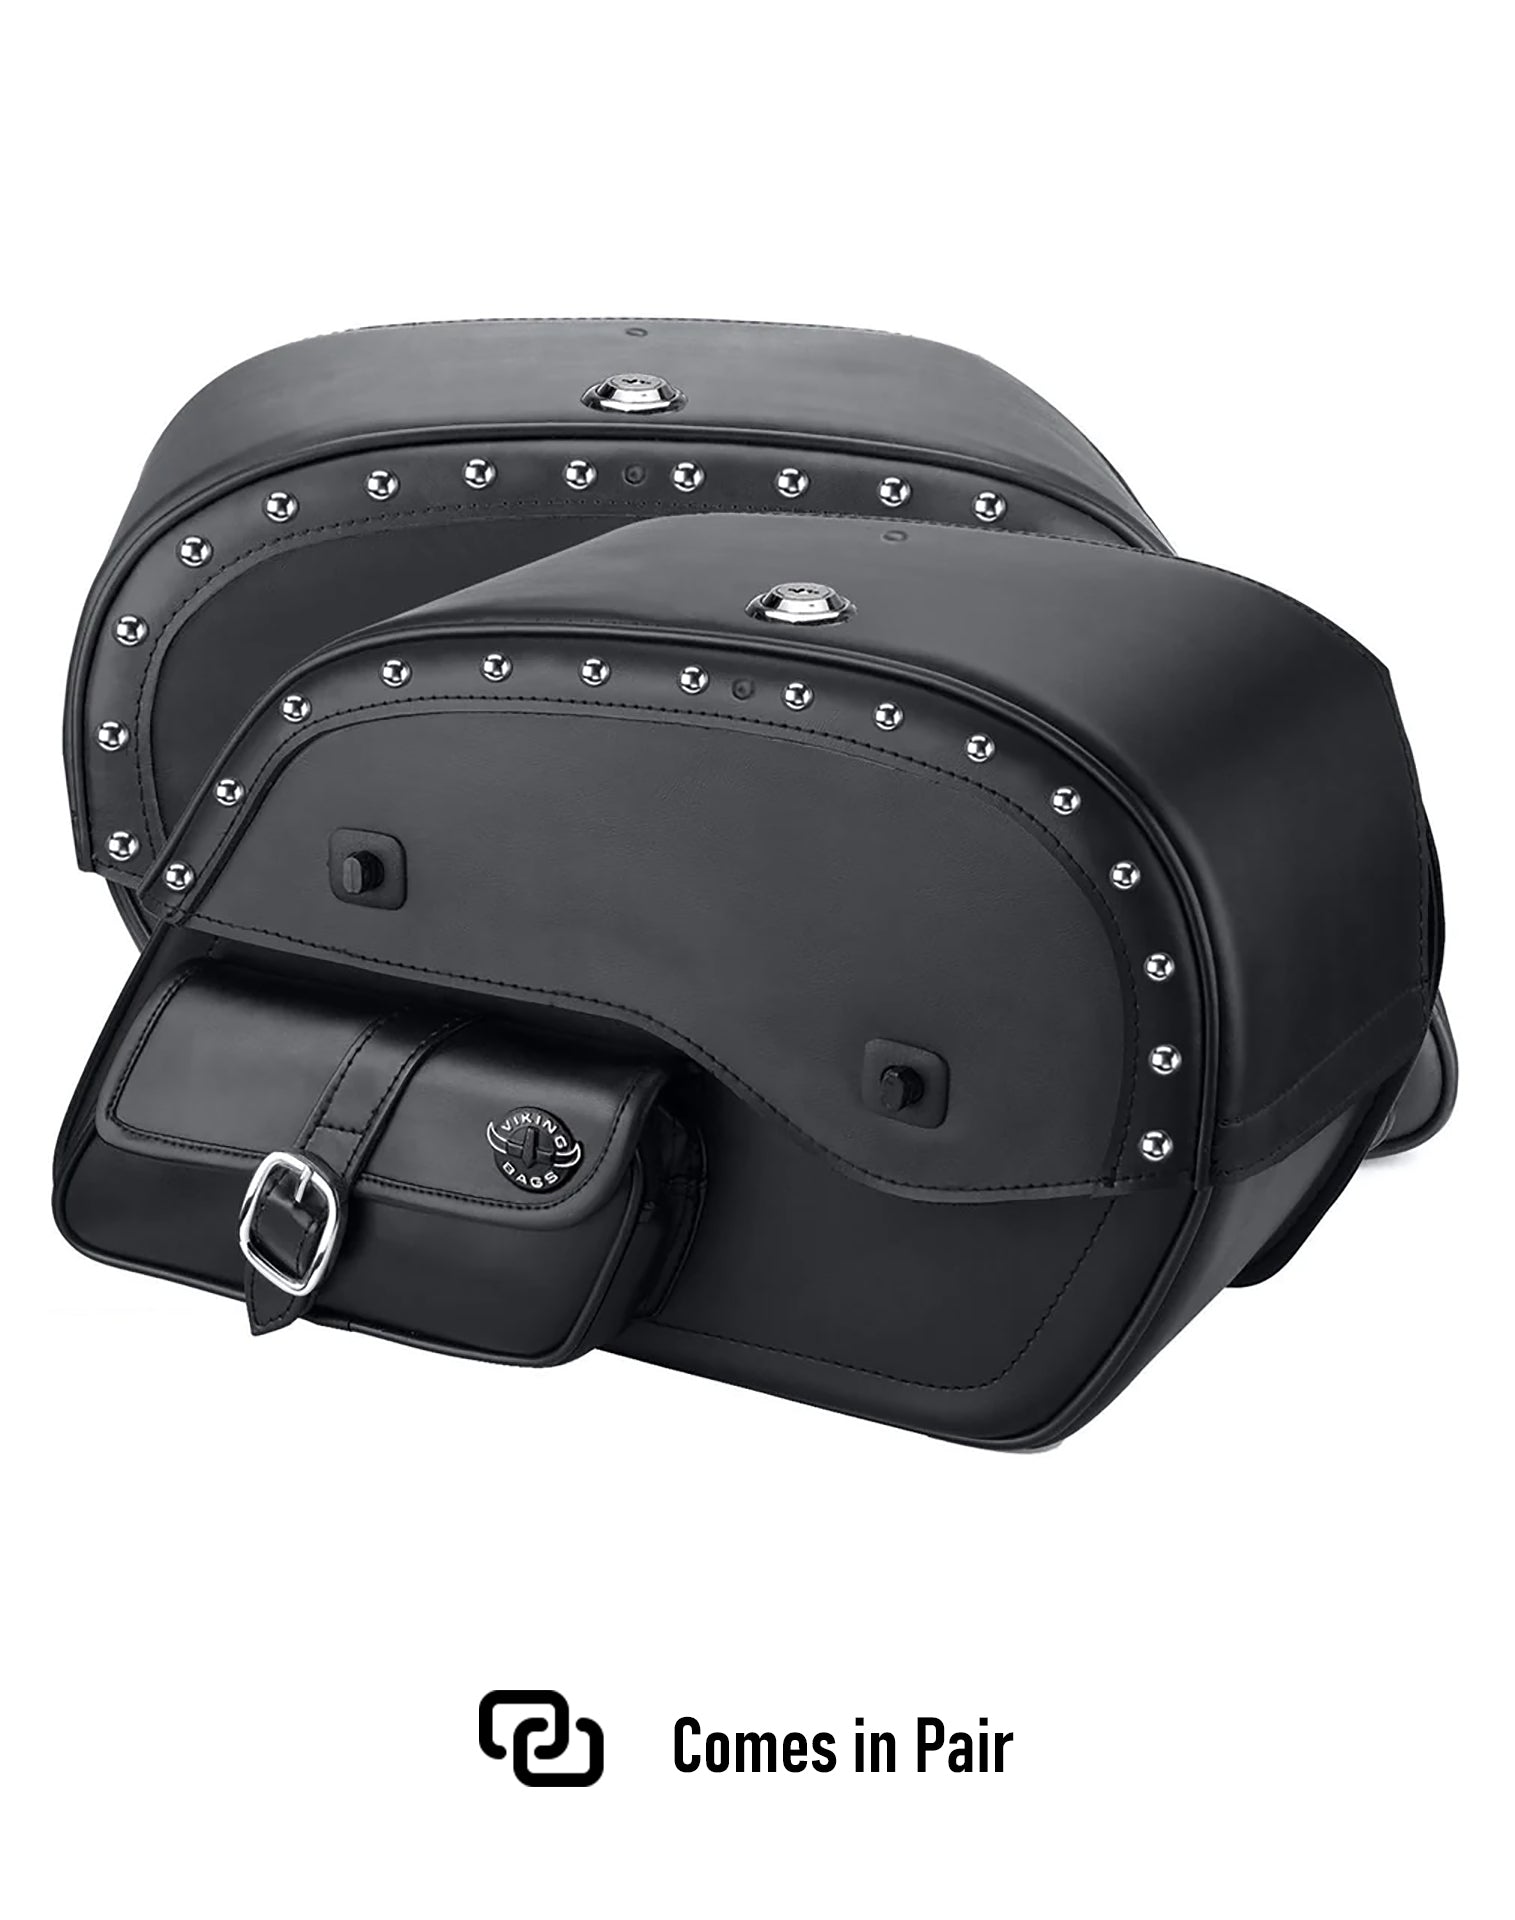 Viking Side Pocket Large Studded Triumph Speedmaster Leather Motorcycle Saddlebags Comes in Pair